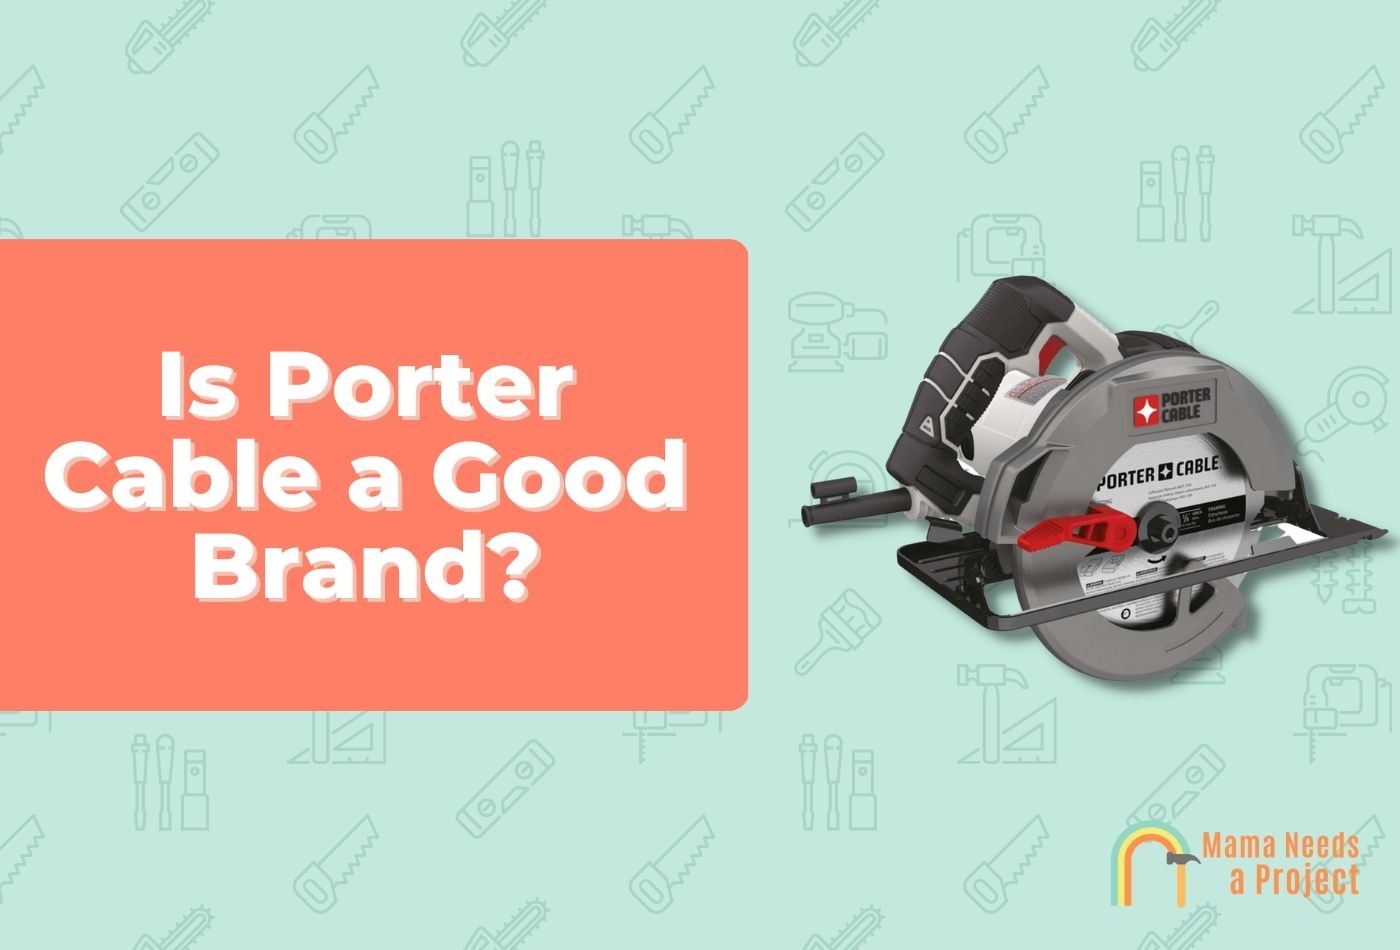 Is Porter Cable a Good Brand?